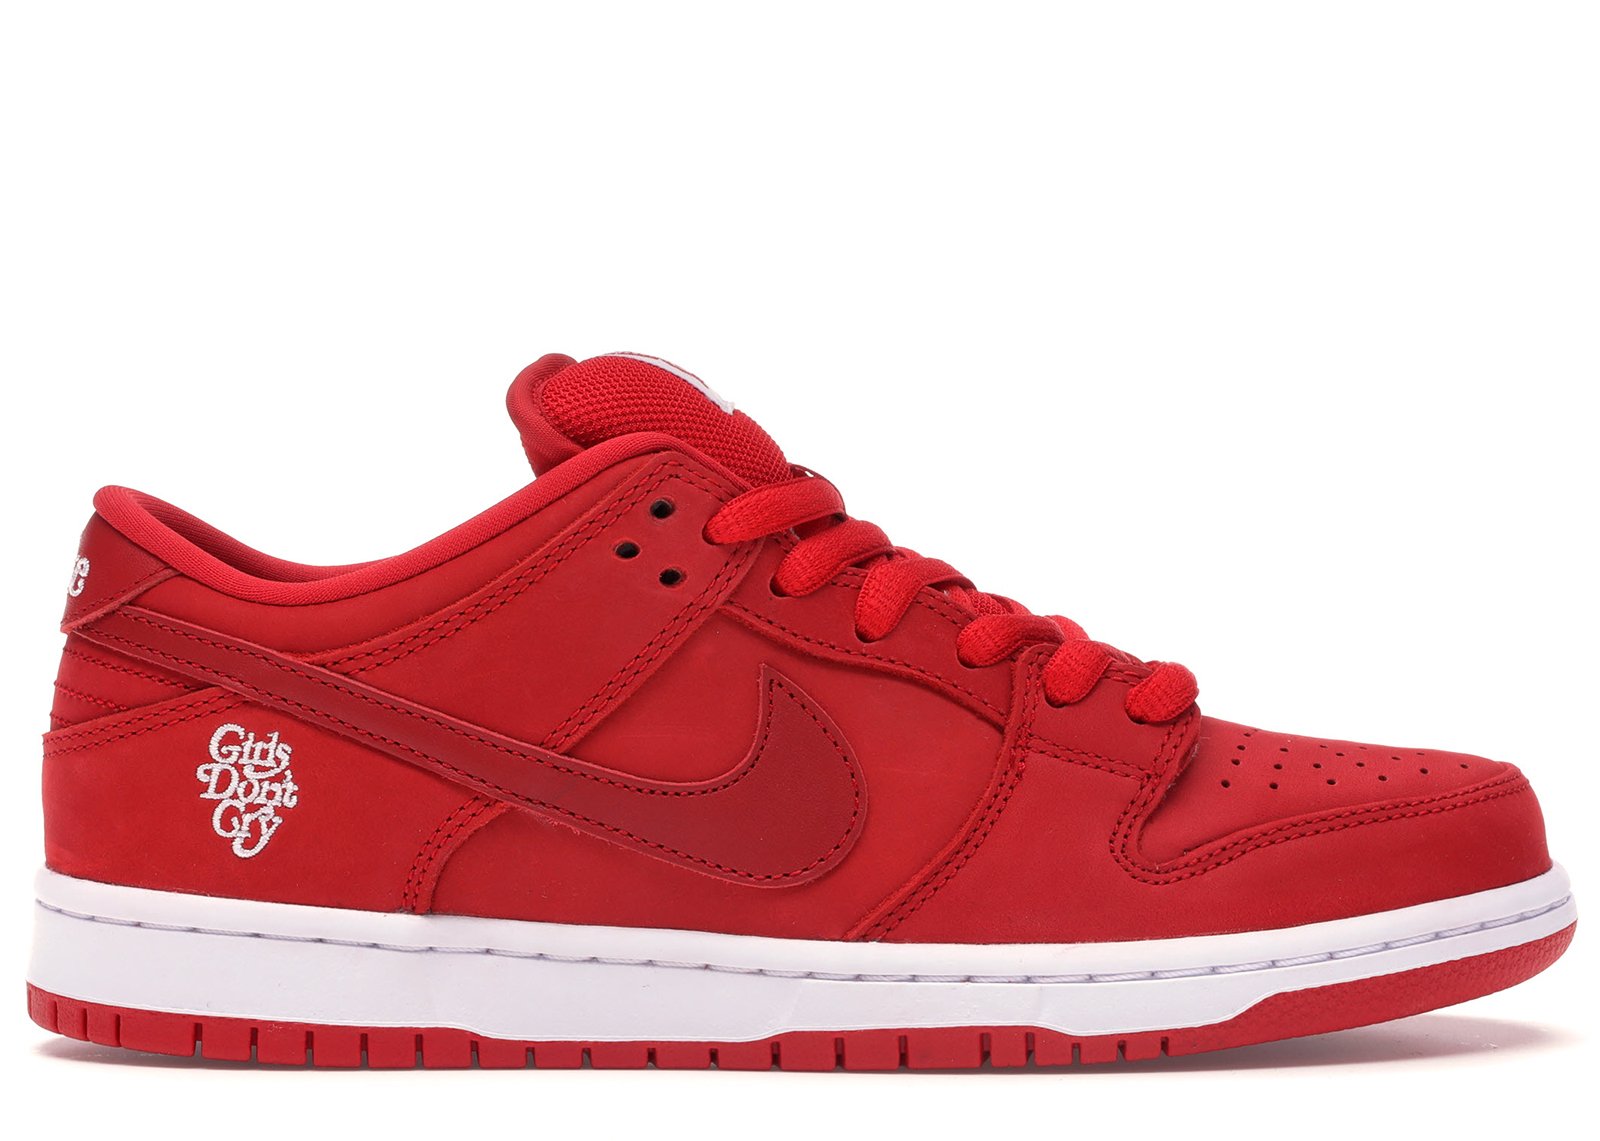 Nike SB Dunk Low Verdy Girls Don't Cry sneakers